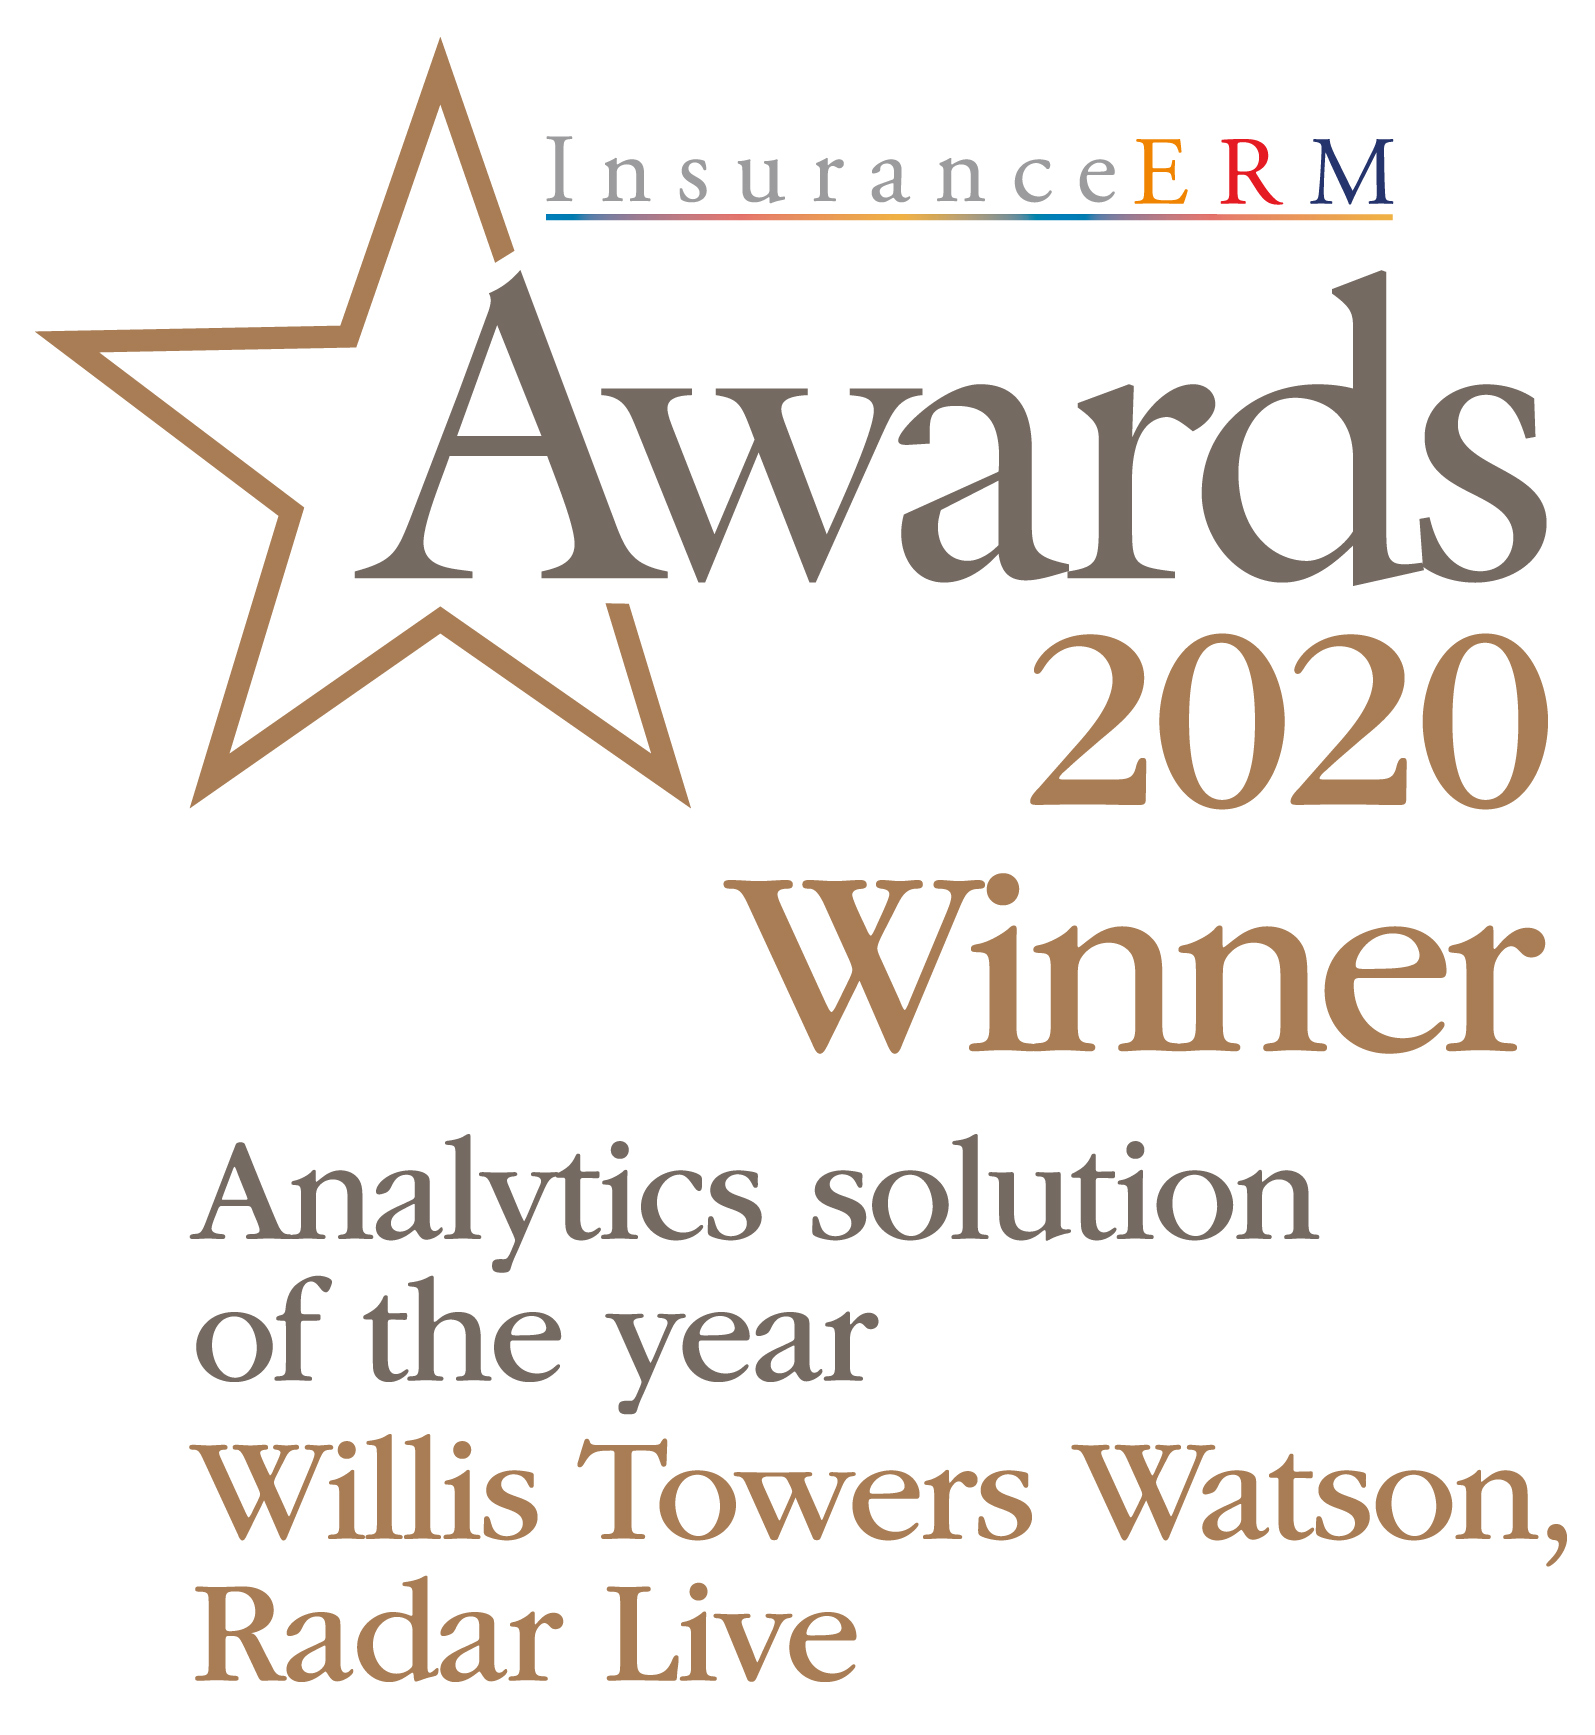 Image with text showing: Insurance ERM Awards 2020 Winner for Analytics Solution of the year. Willis Towers Watson, Radar Live